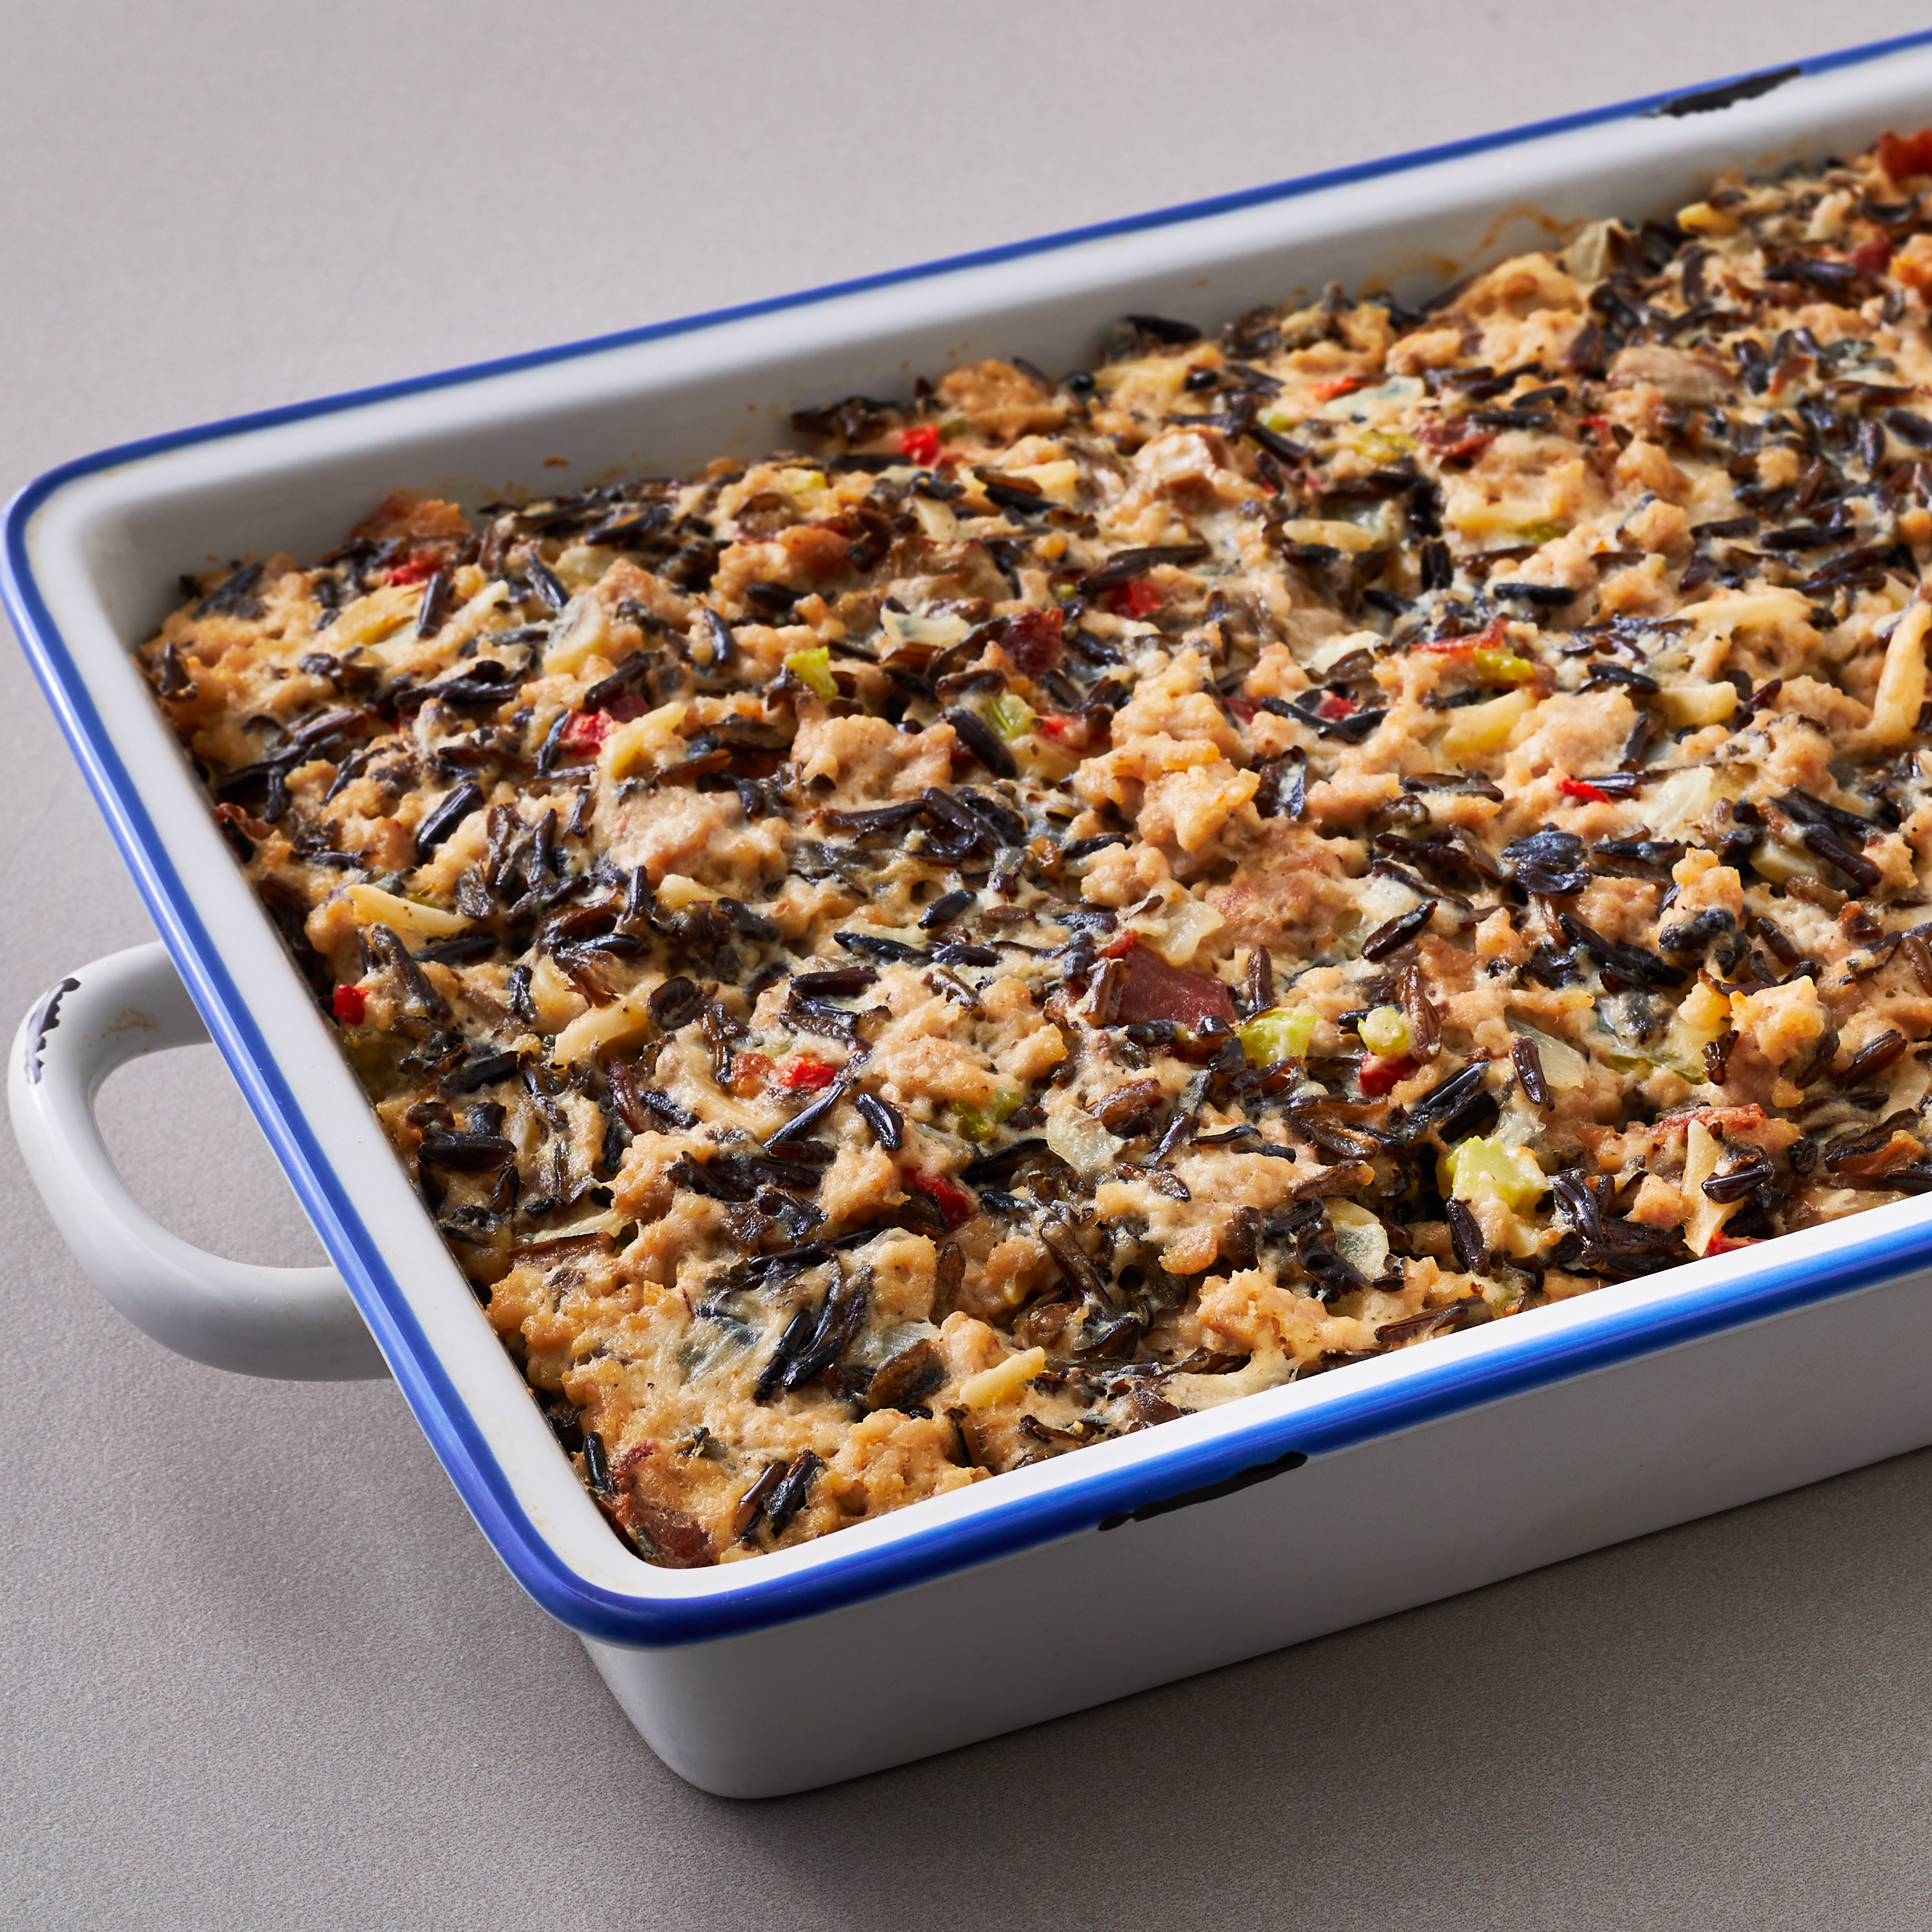 Pork and Wild Rice Casserole Trusted Brands